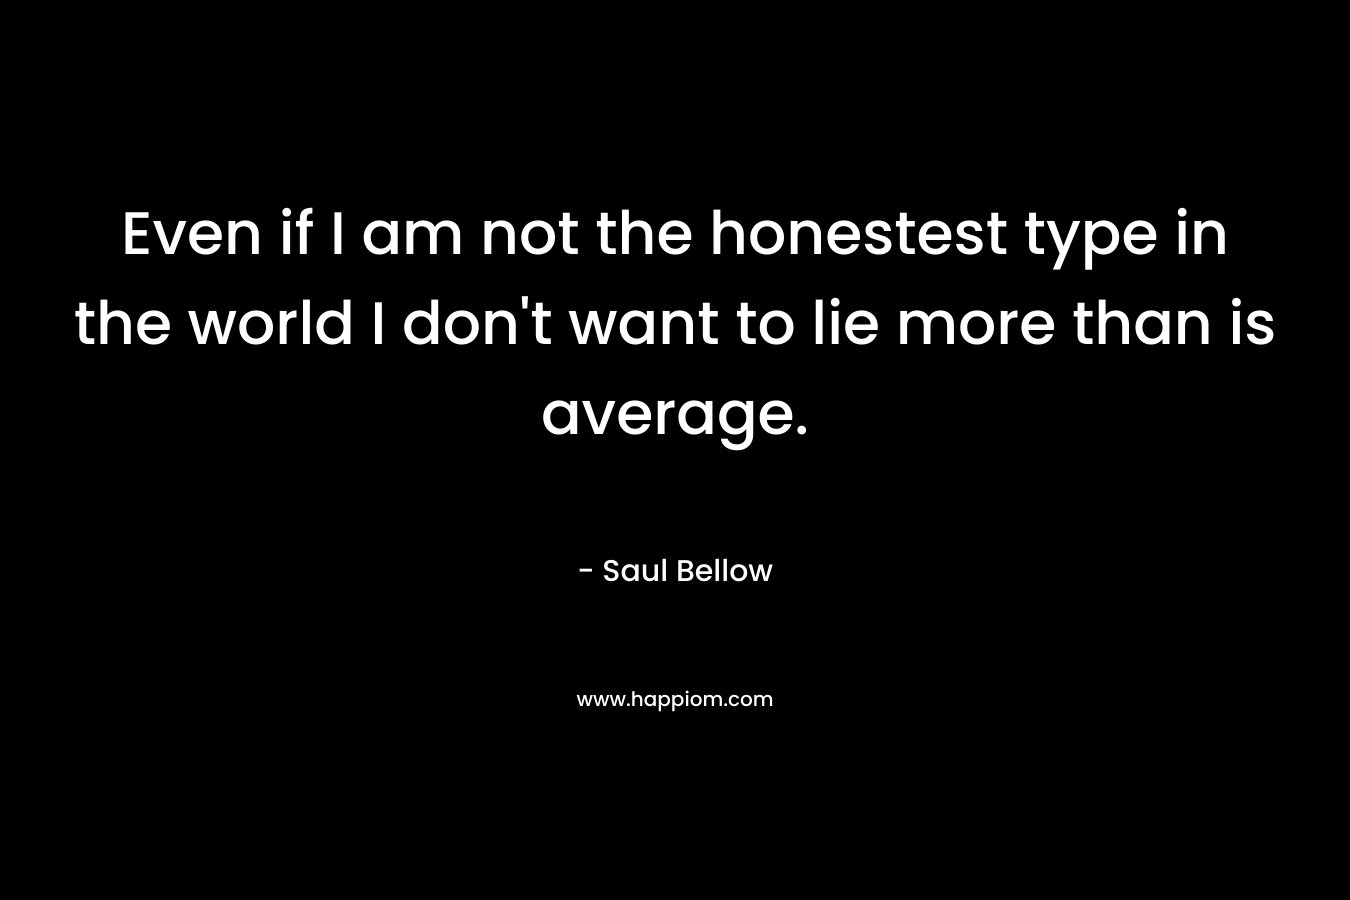 Even if I am not the honestest type in the world I don’t want to lie more than is average. – Saul Bellow